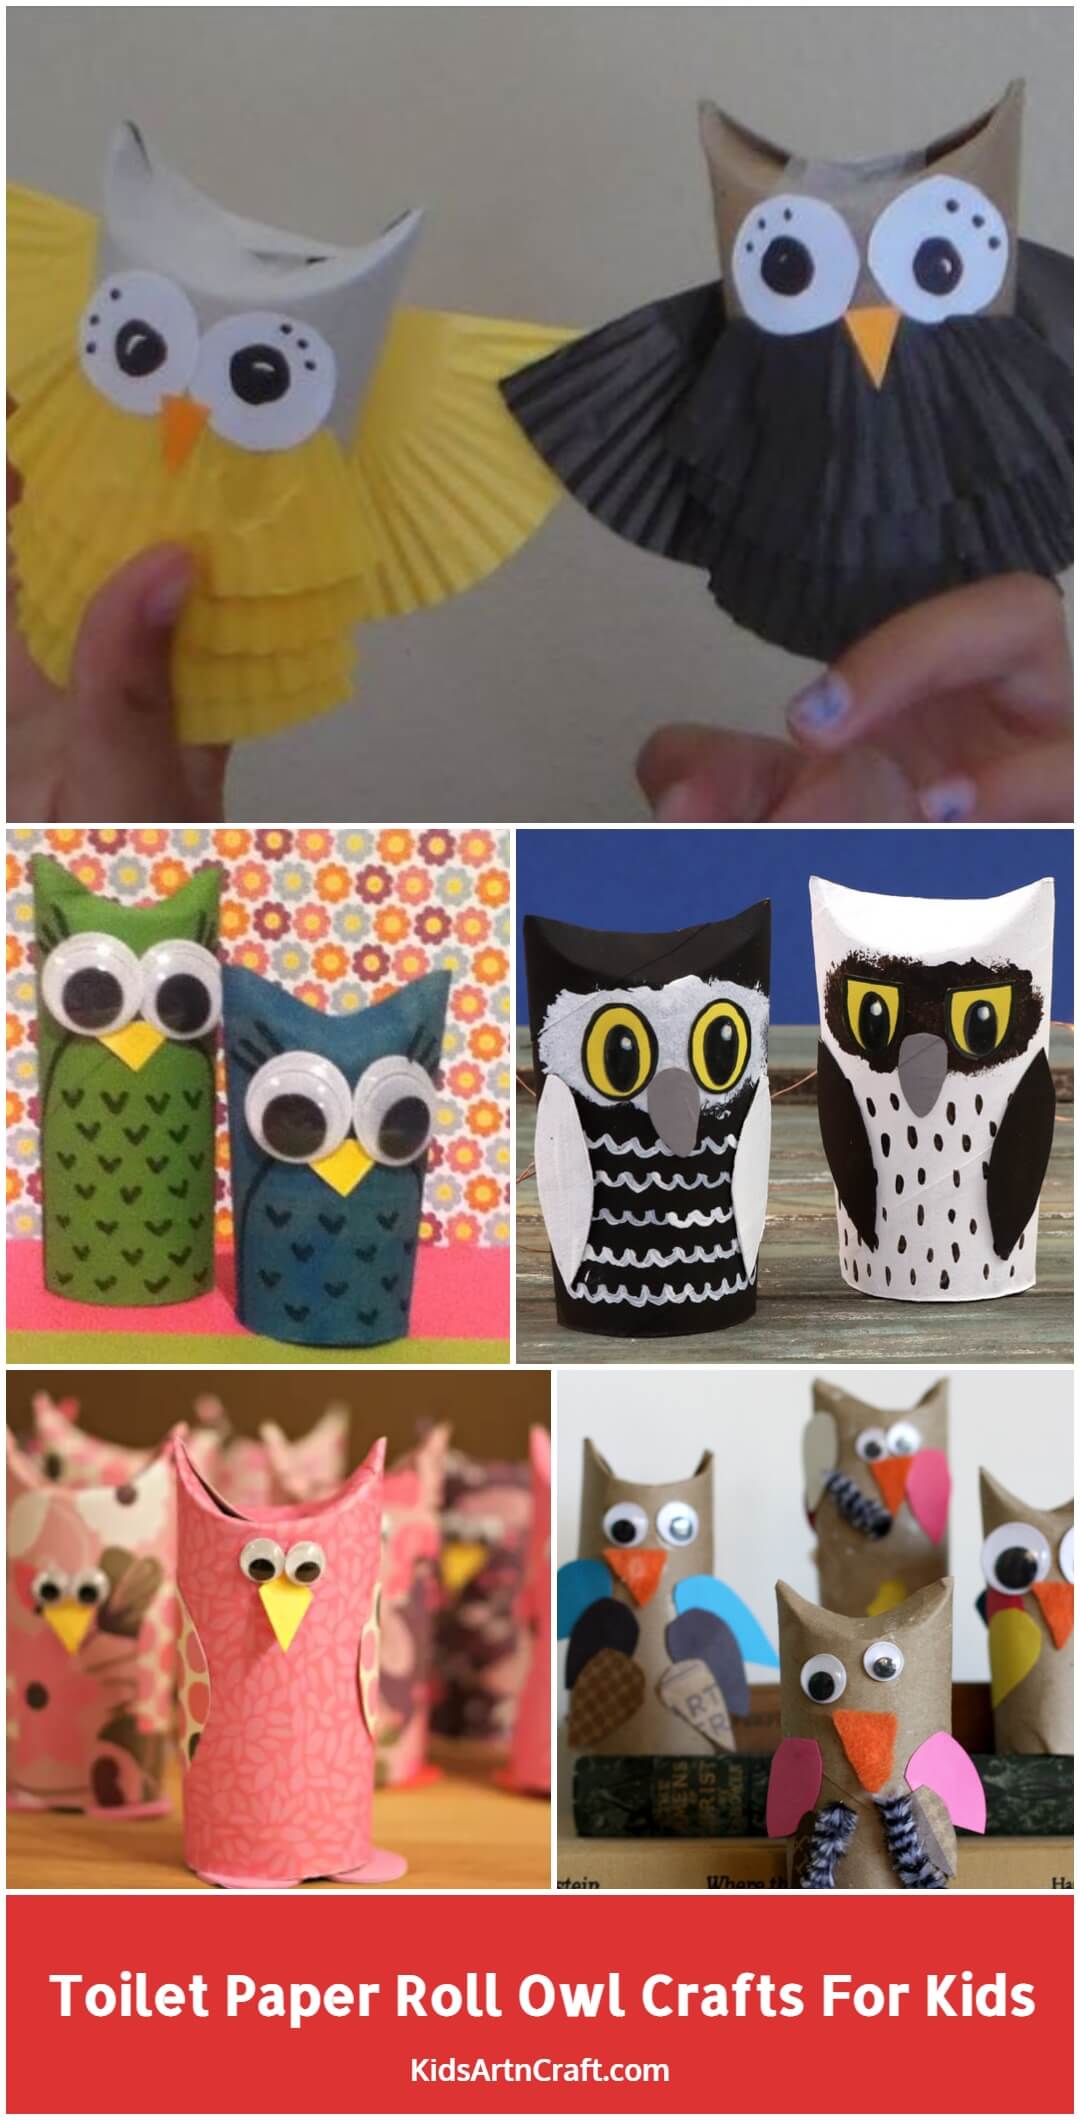 Toilet Paper Roll Owl Crafts for Kids